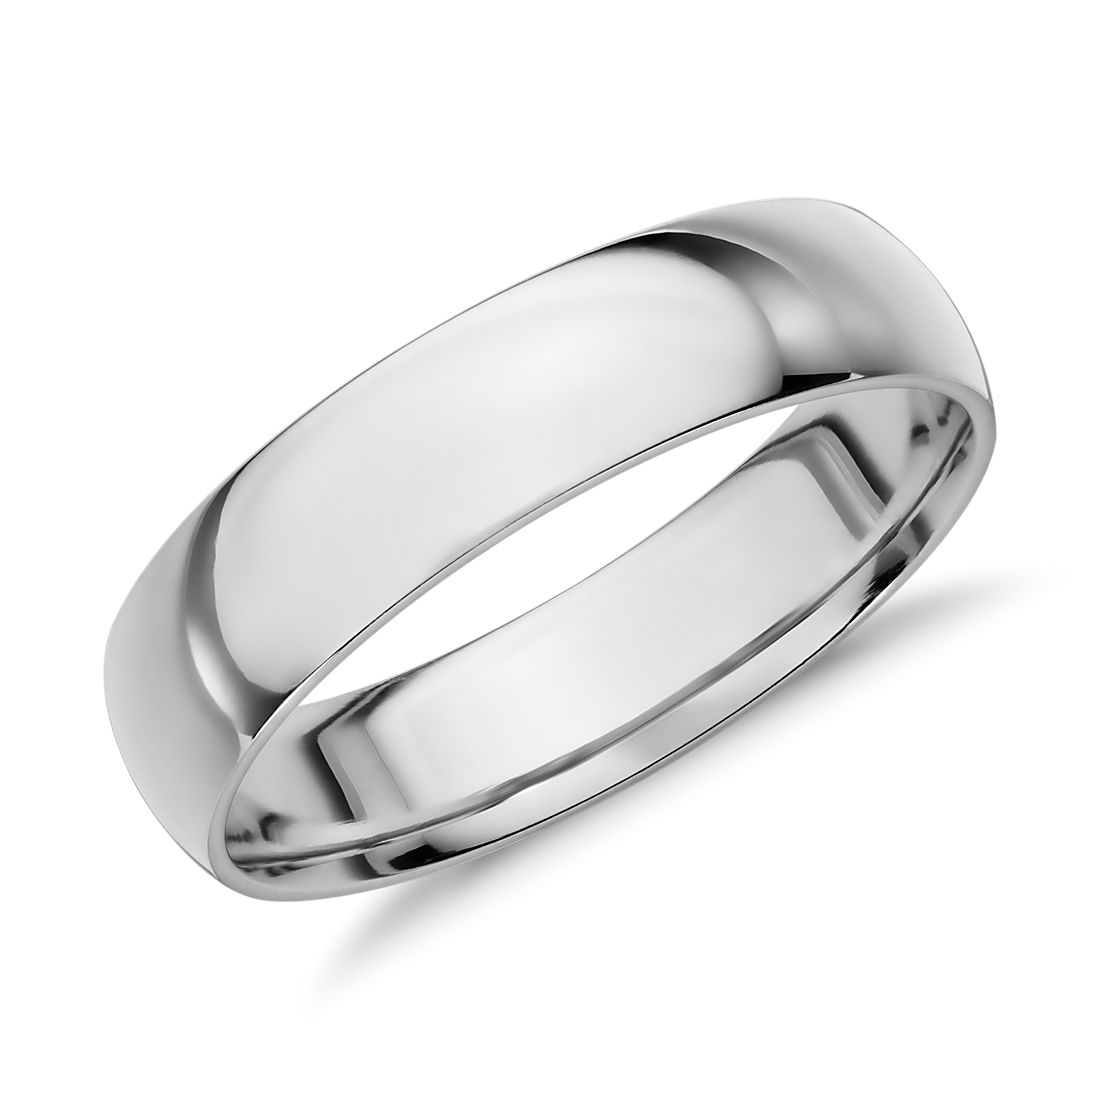 3 mm Solid 14k White Gold Plain Comfort Fit Wedding Band Ring Polished Finish 